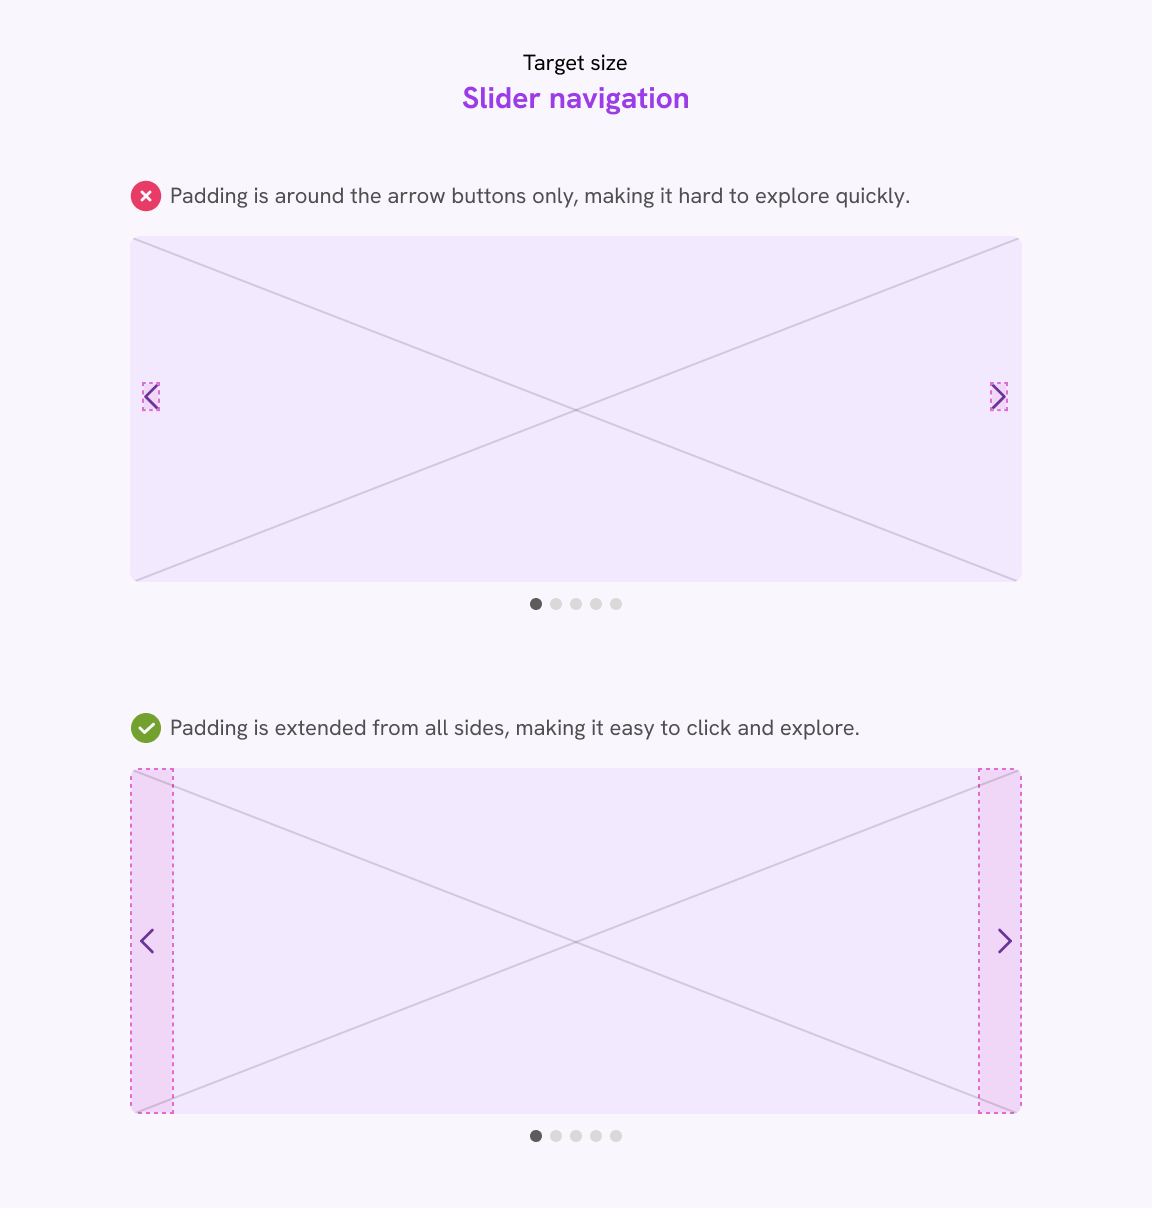 A slider UI spec that shows how to make the target size for the slider arrows.